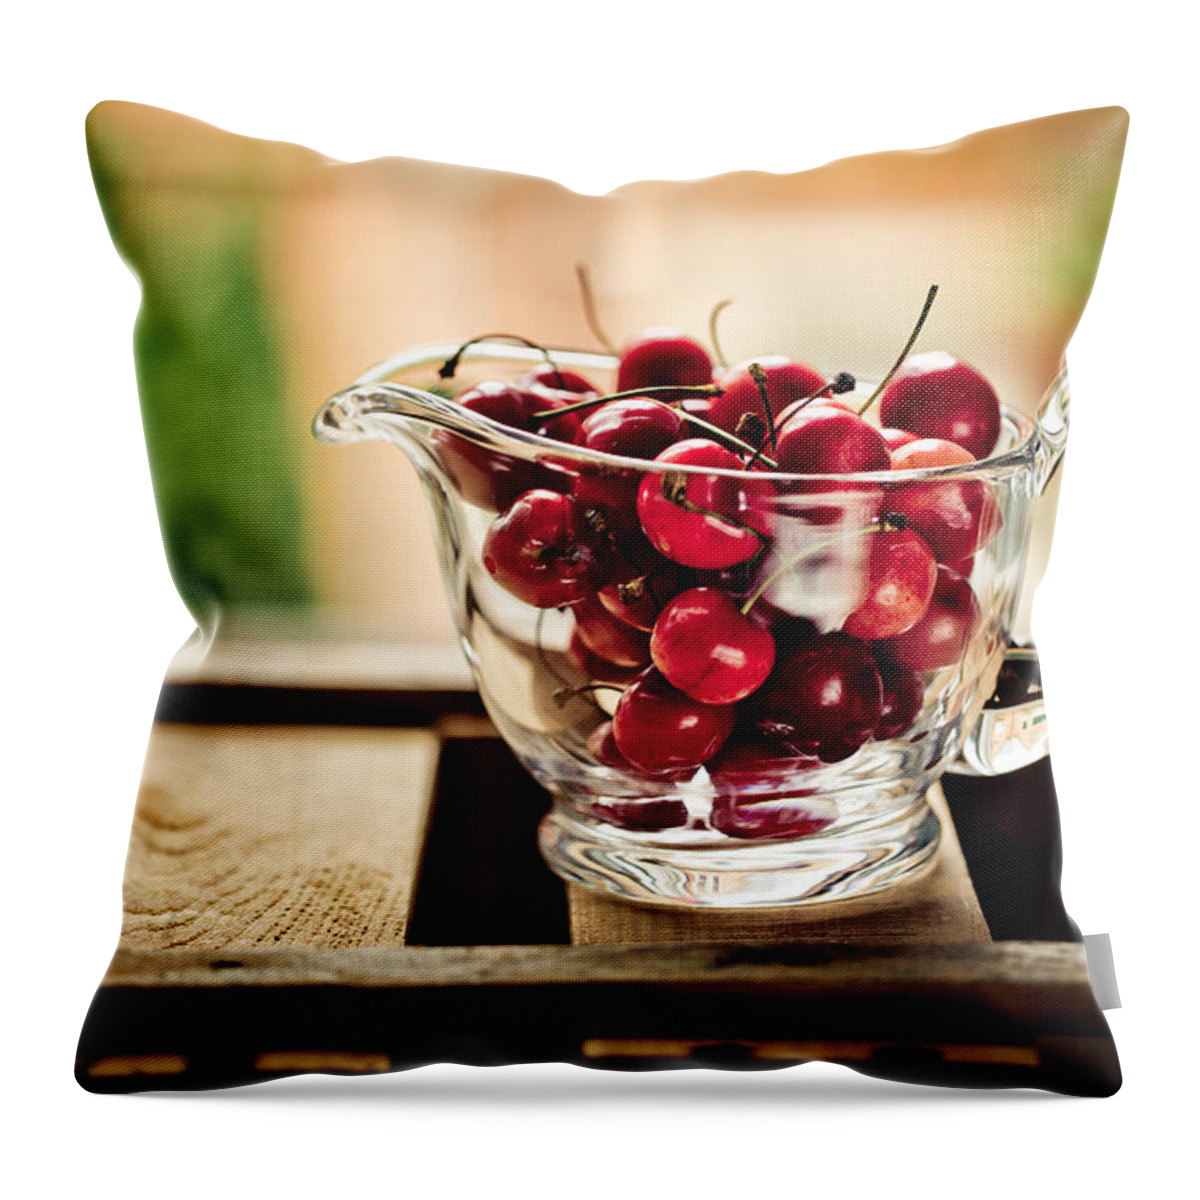 Cherry Throw Pillow featuring the photograph Cherries #1 by Nailia Schwarz